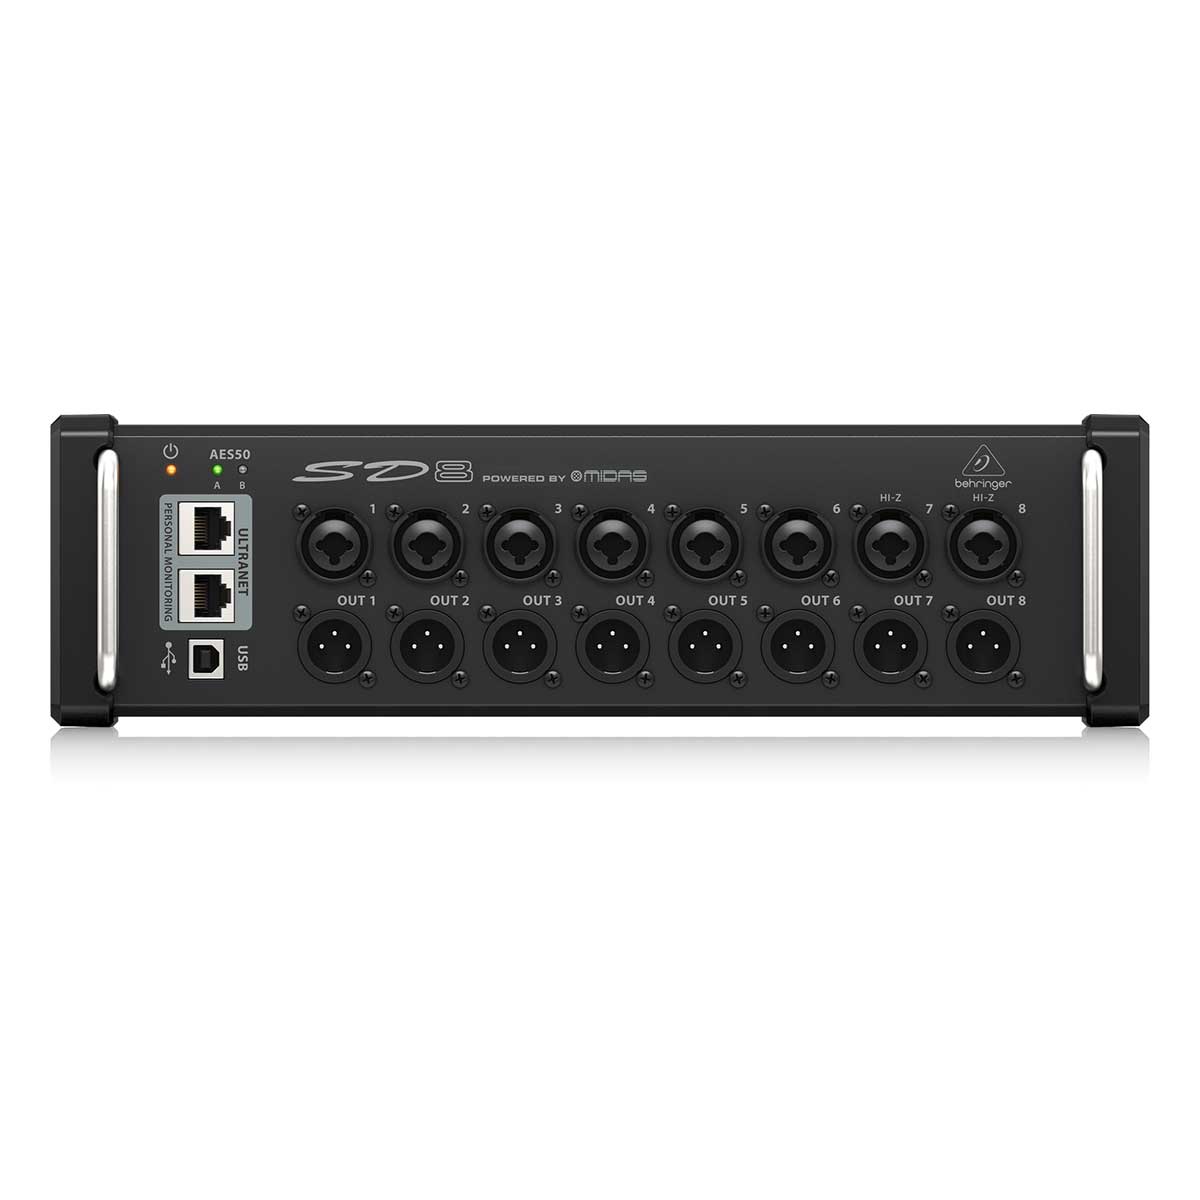 Behringer SD8 Stagebox with 8 Remote-Controllable Midas Preamps, 8 Outputs, AES50 Networking and ULTRANET Personal Monitoring Hub